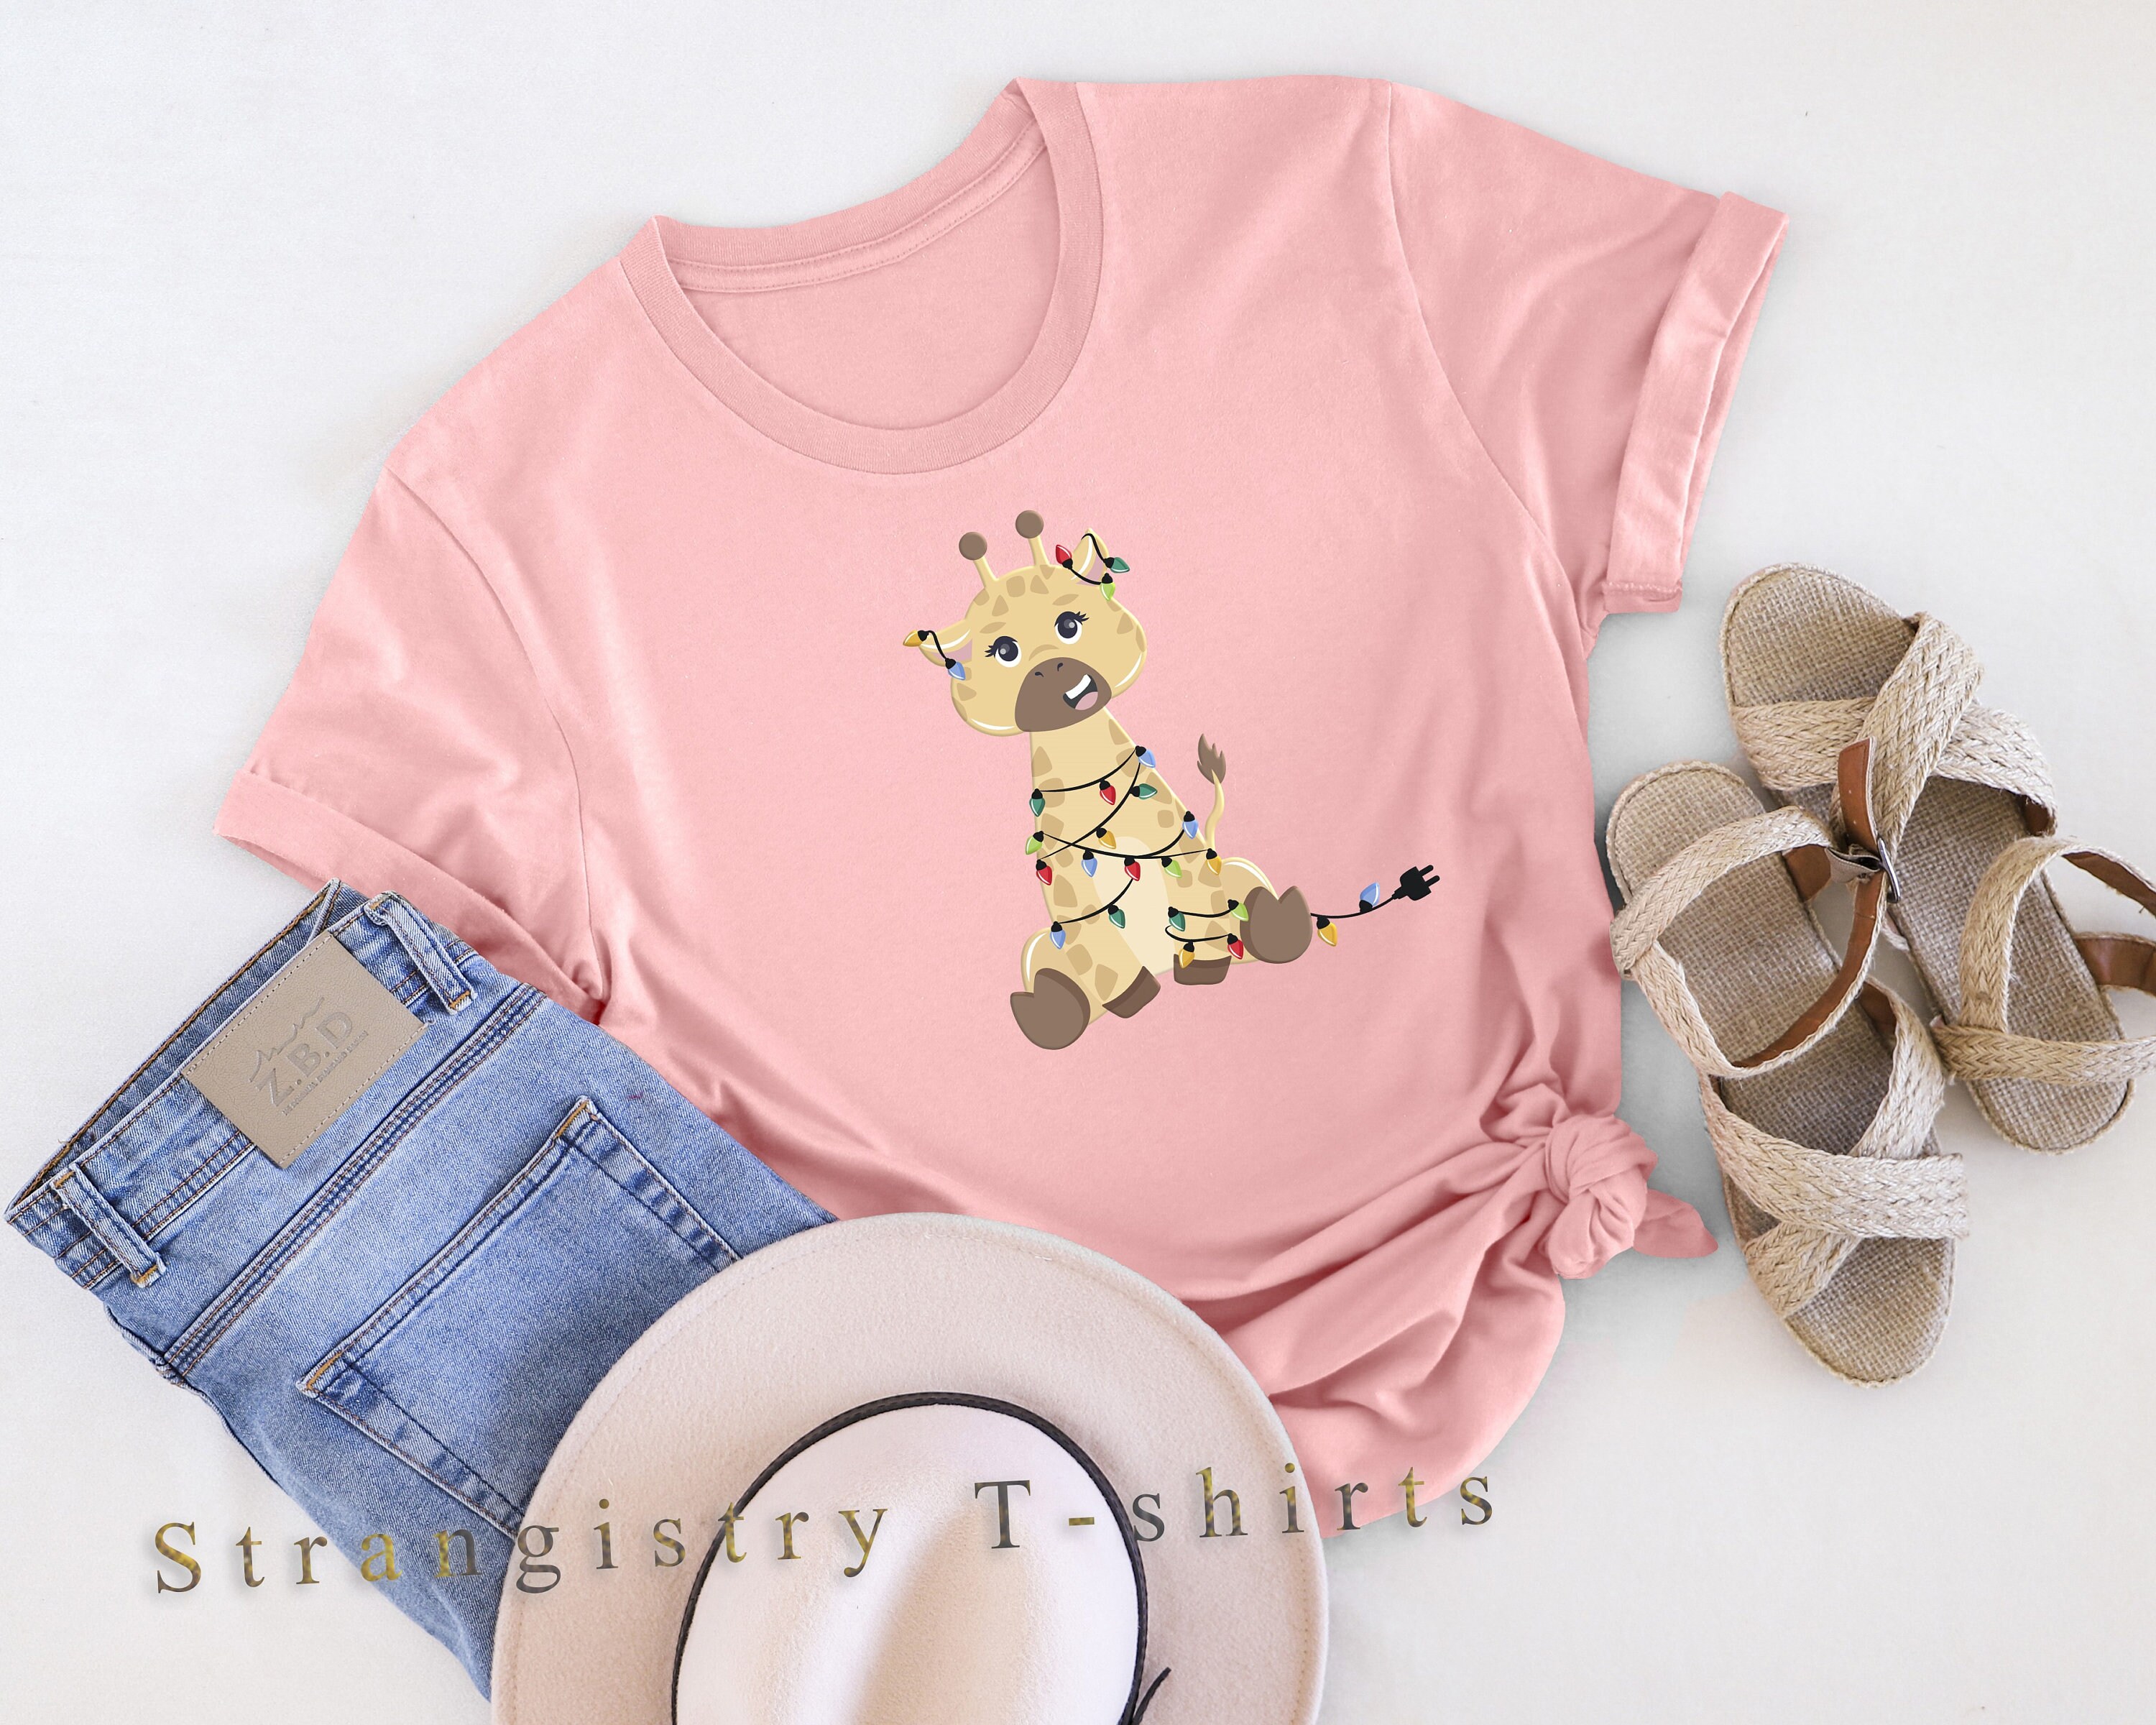 Funny Christmas T-shirt with Cute Baby Giraffe, Funny Christmas T-shirt for Babies, Christmas Shirt Gift for Family, Friends and Loved Ones.